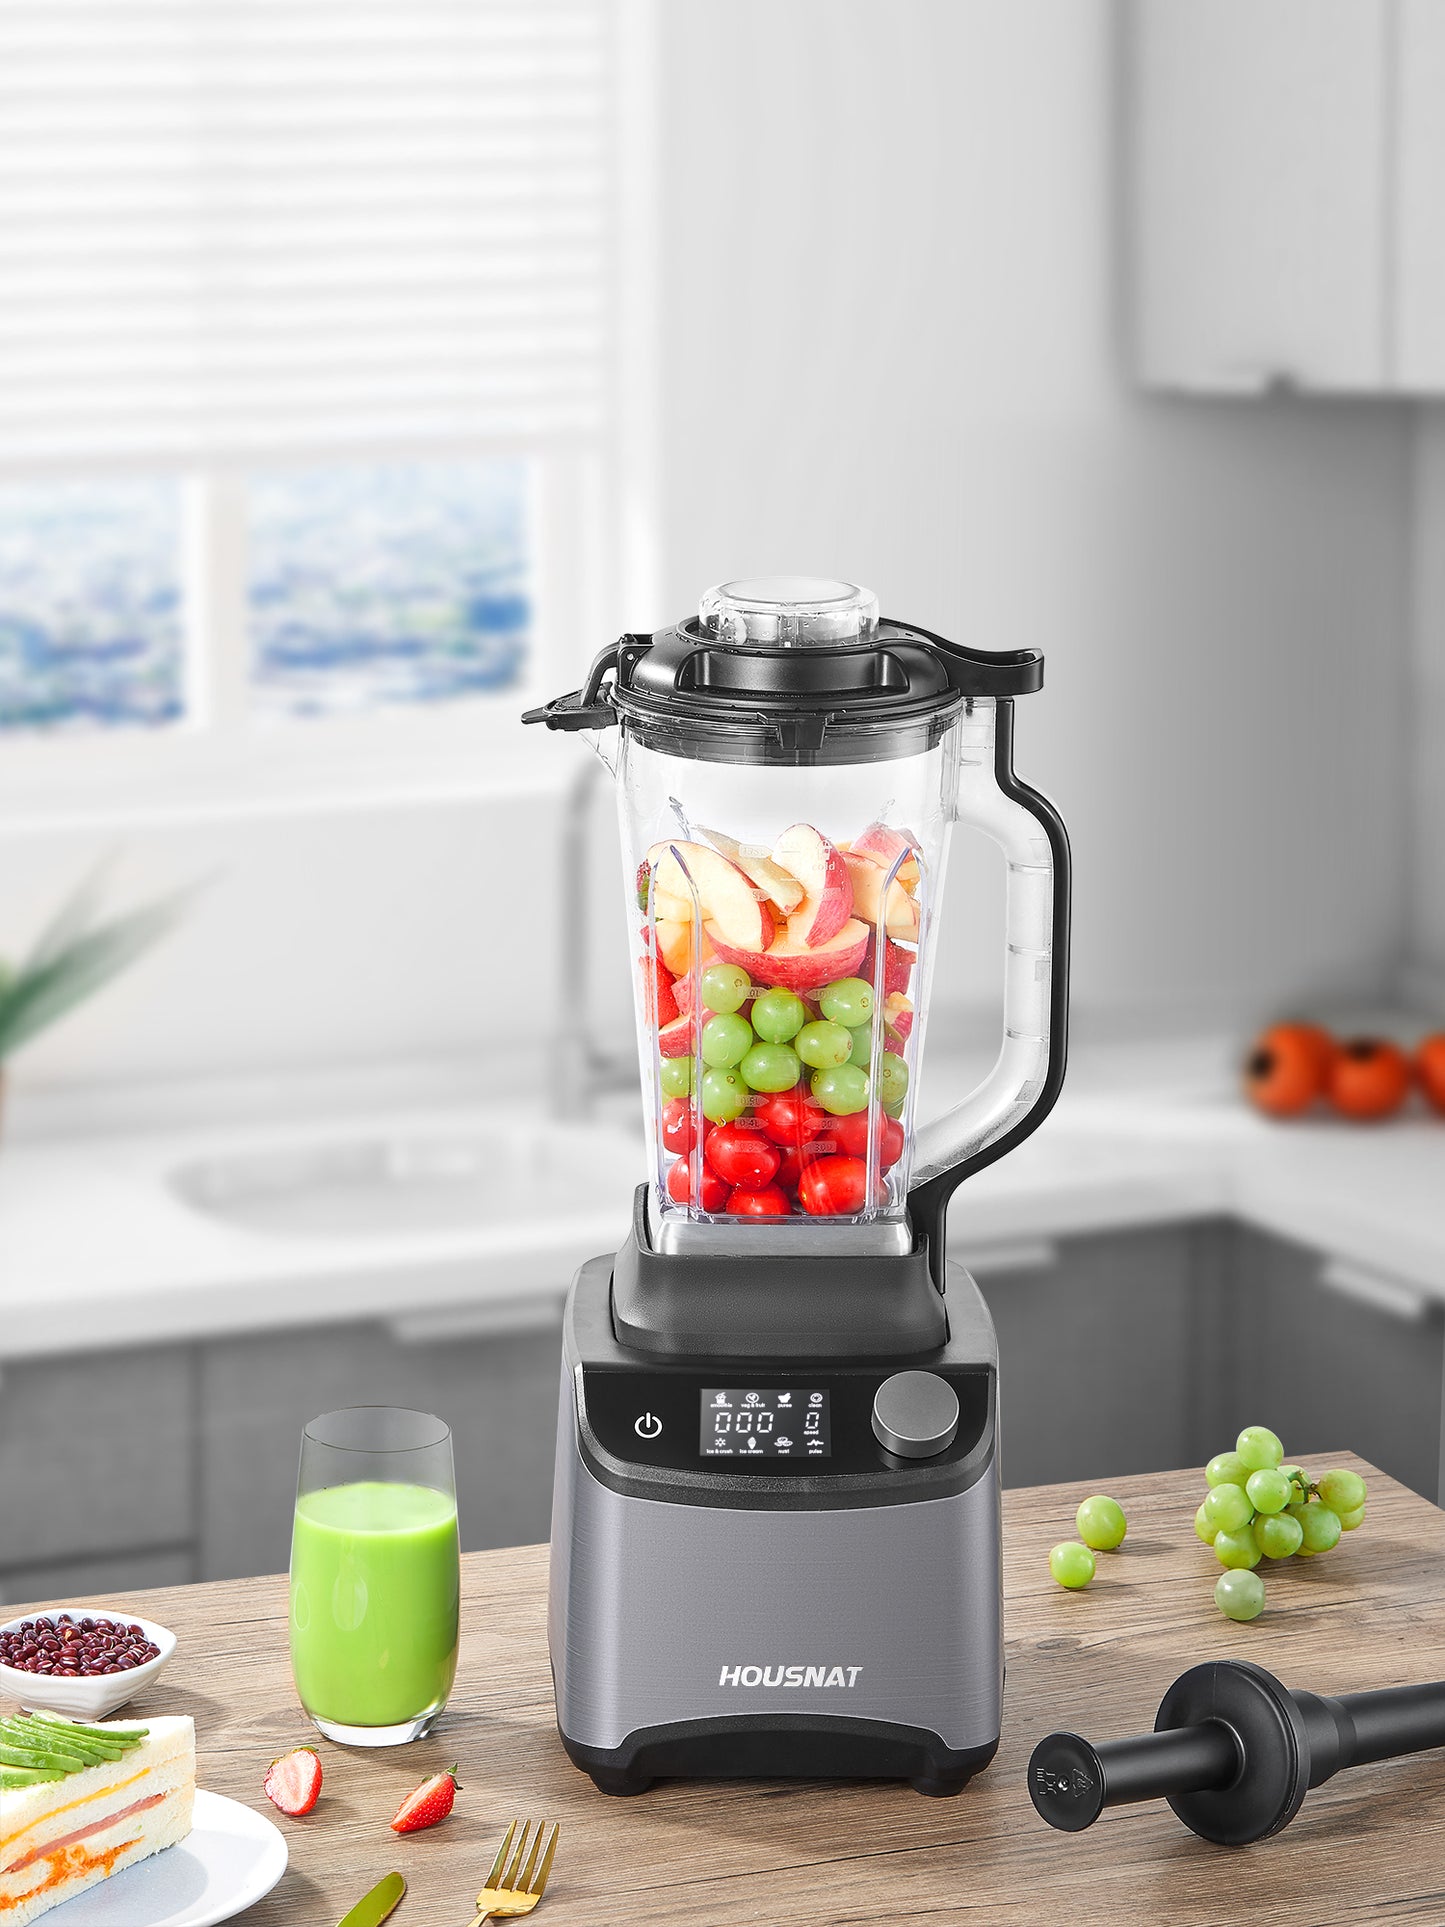 Smoothie Blender, Blender for Shakes and Smoothies, 1200W Professional HOUSNAT Countertop Blender for Kitchen, 8 Smart Presets, 8 Speeds, 60OZ BPA Free Pitcher, Infinite Rotary Control